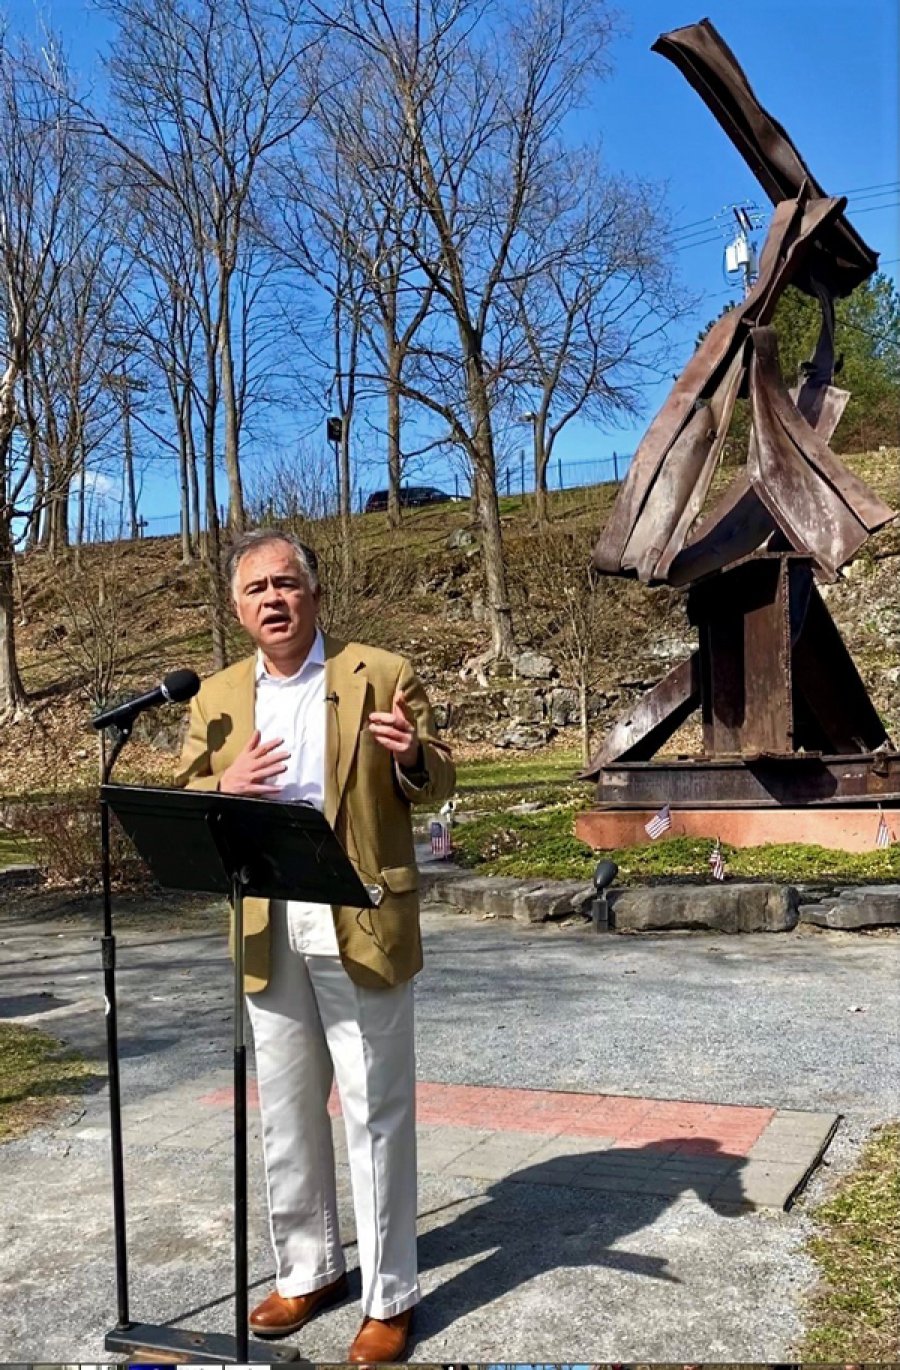 Ron Kim announces his candidacy for mayor of Saratoga Springs.  The announcement was made at the 9/11 Memorial in High Rock Park on April 7, 2021. Photo by Thomas Dimopoulos. 